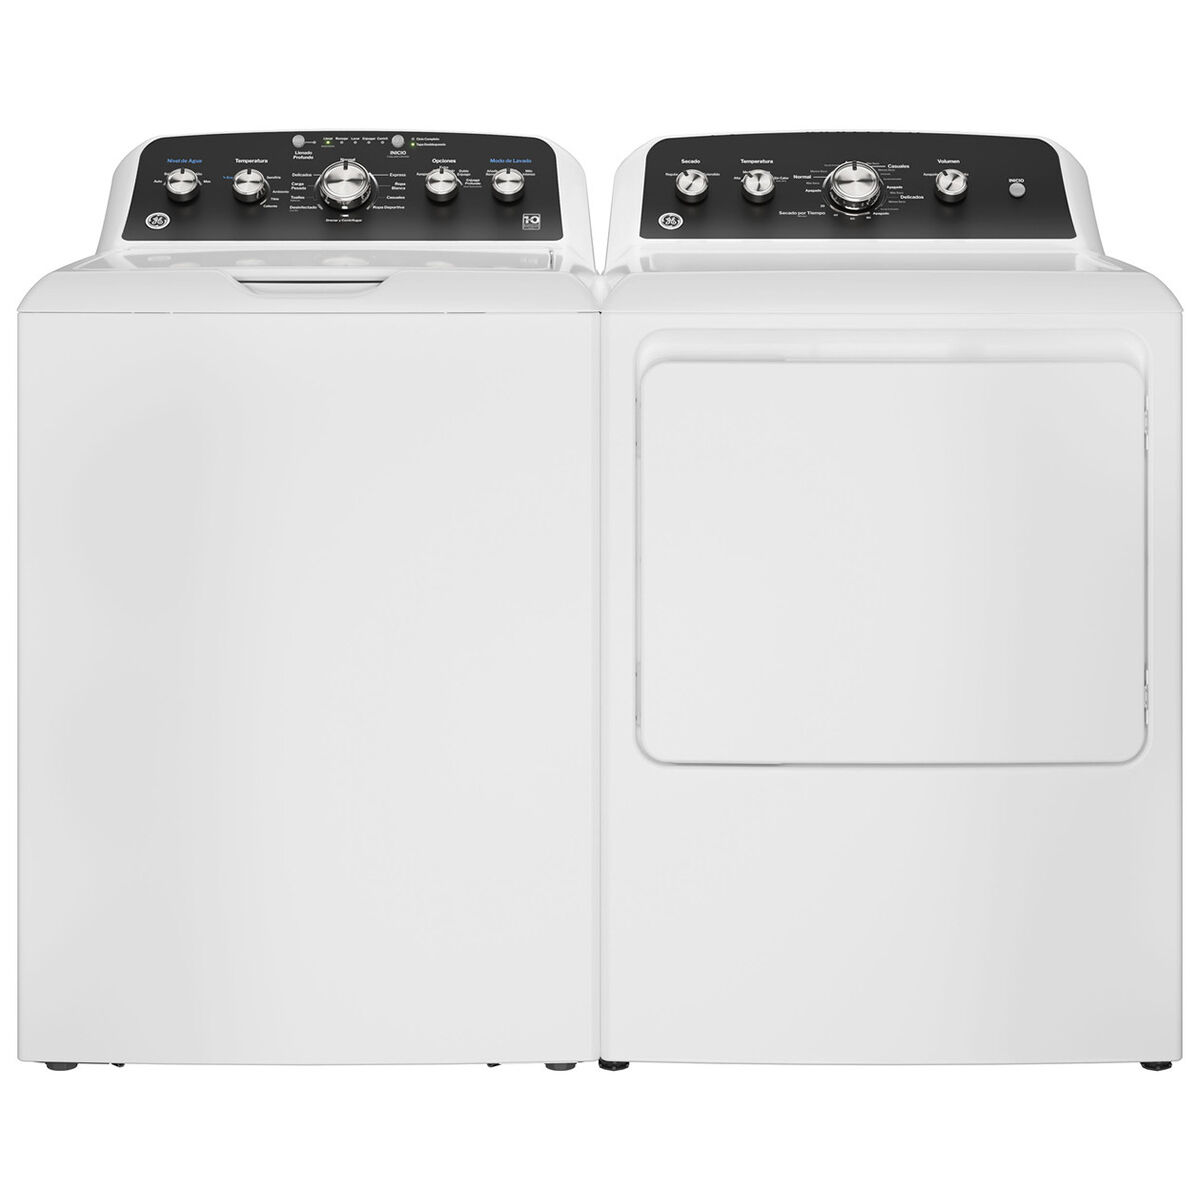 GE 27 in. 4.5 cu. ft. Top Load Washer with Spanish Panel, Wash Modes Soak,  Power, True Dual-Action Agitator & Sanitize with Oxi - White